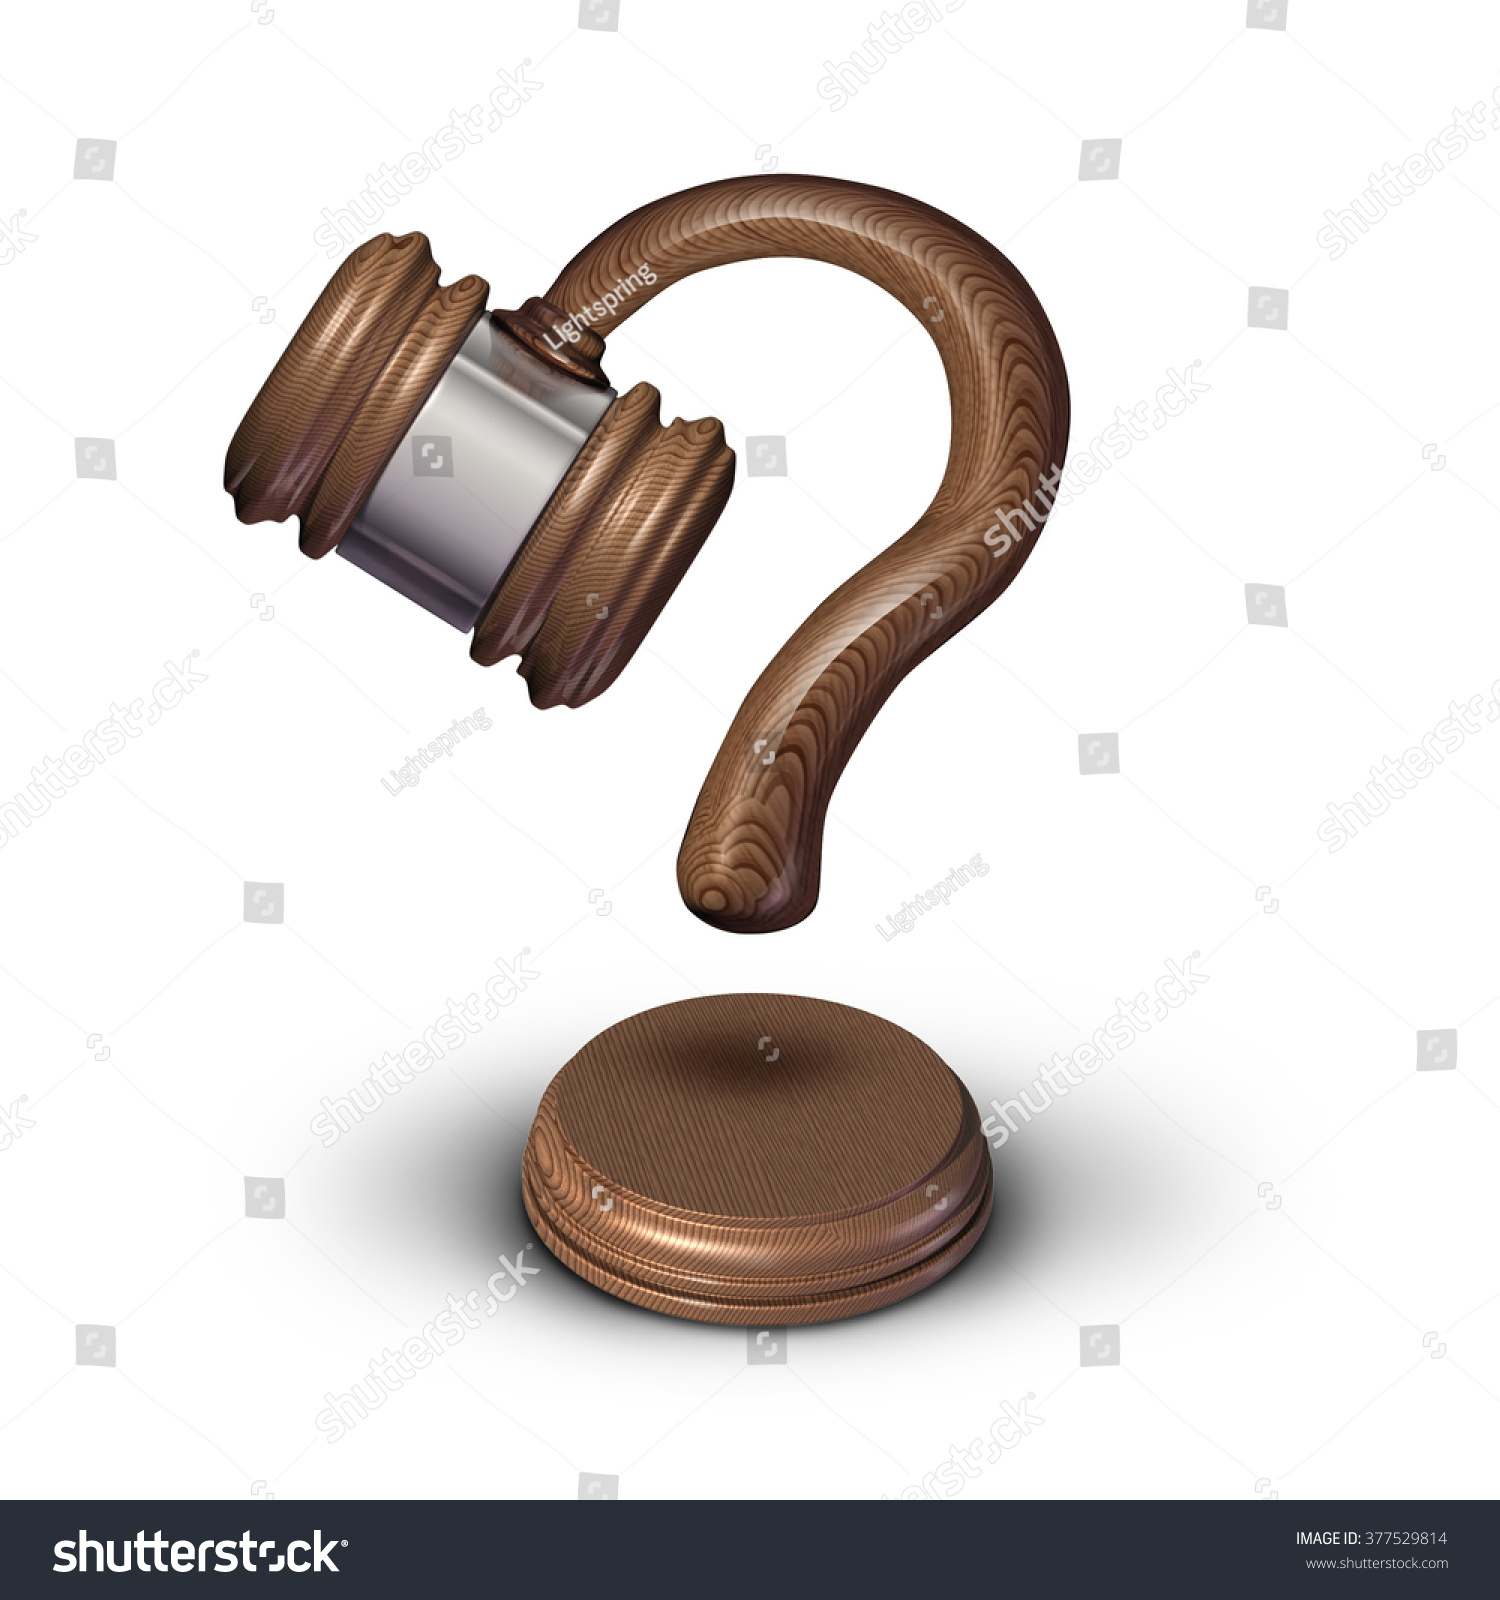 Law Questions